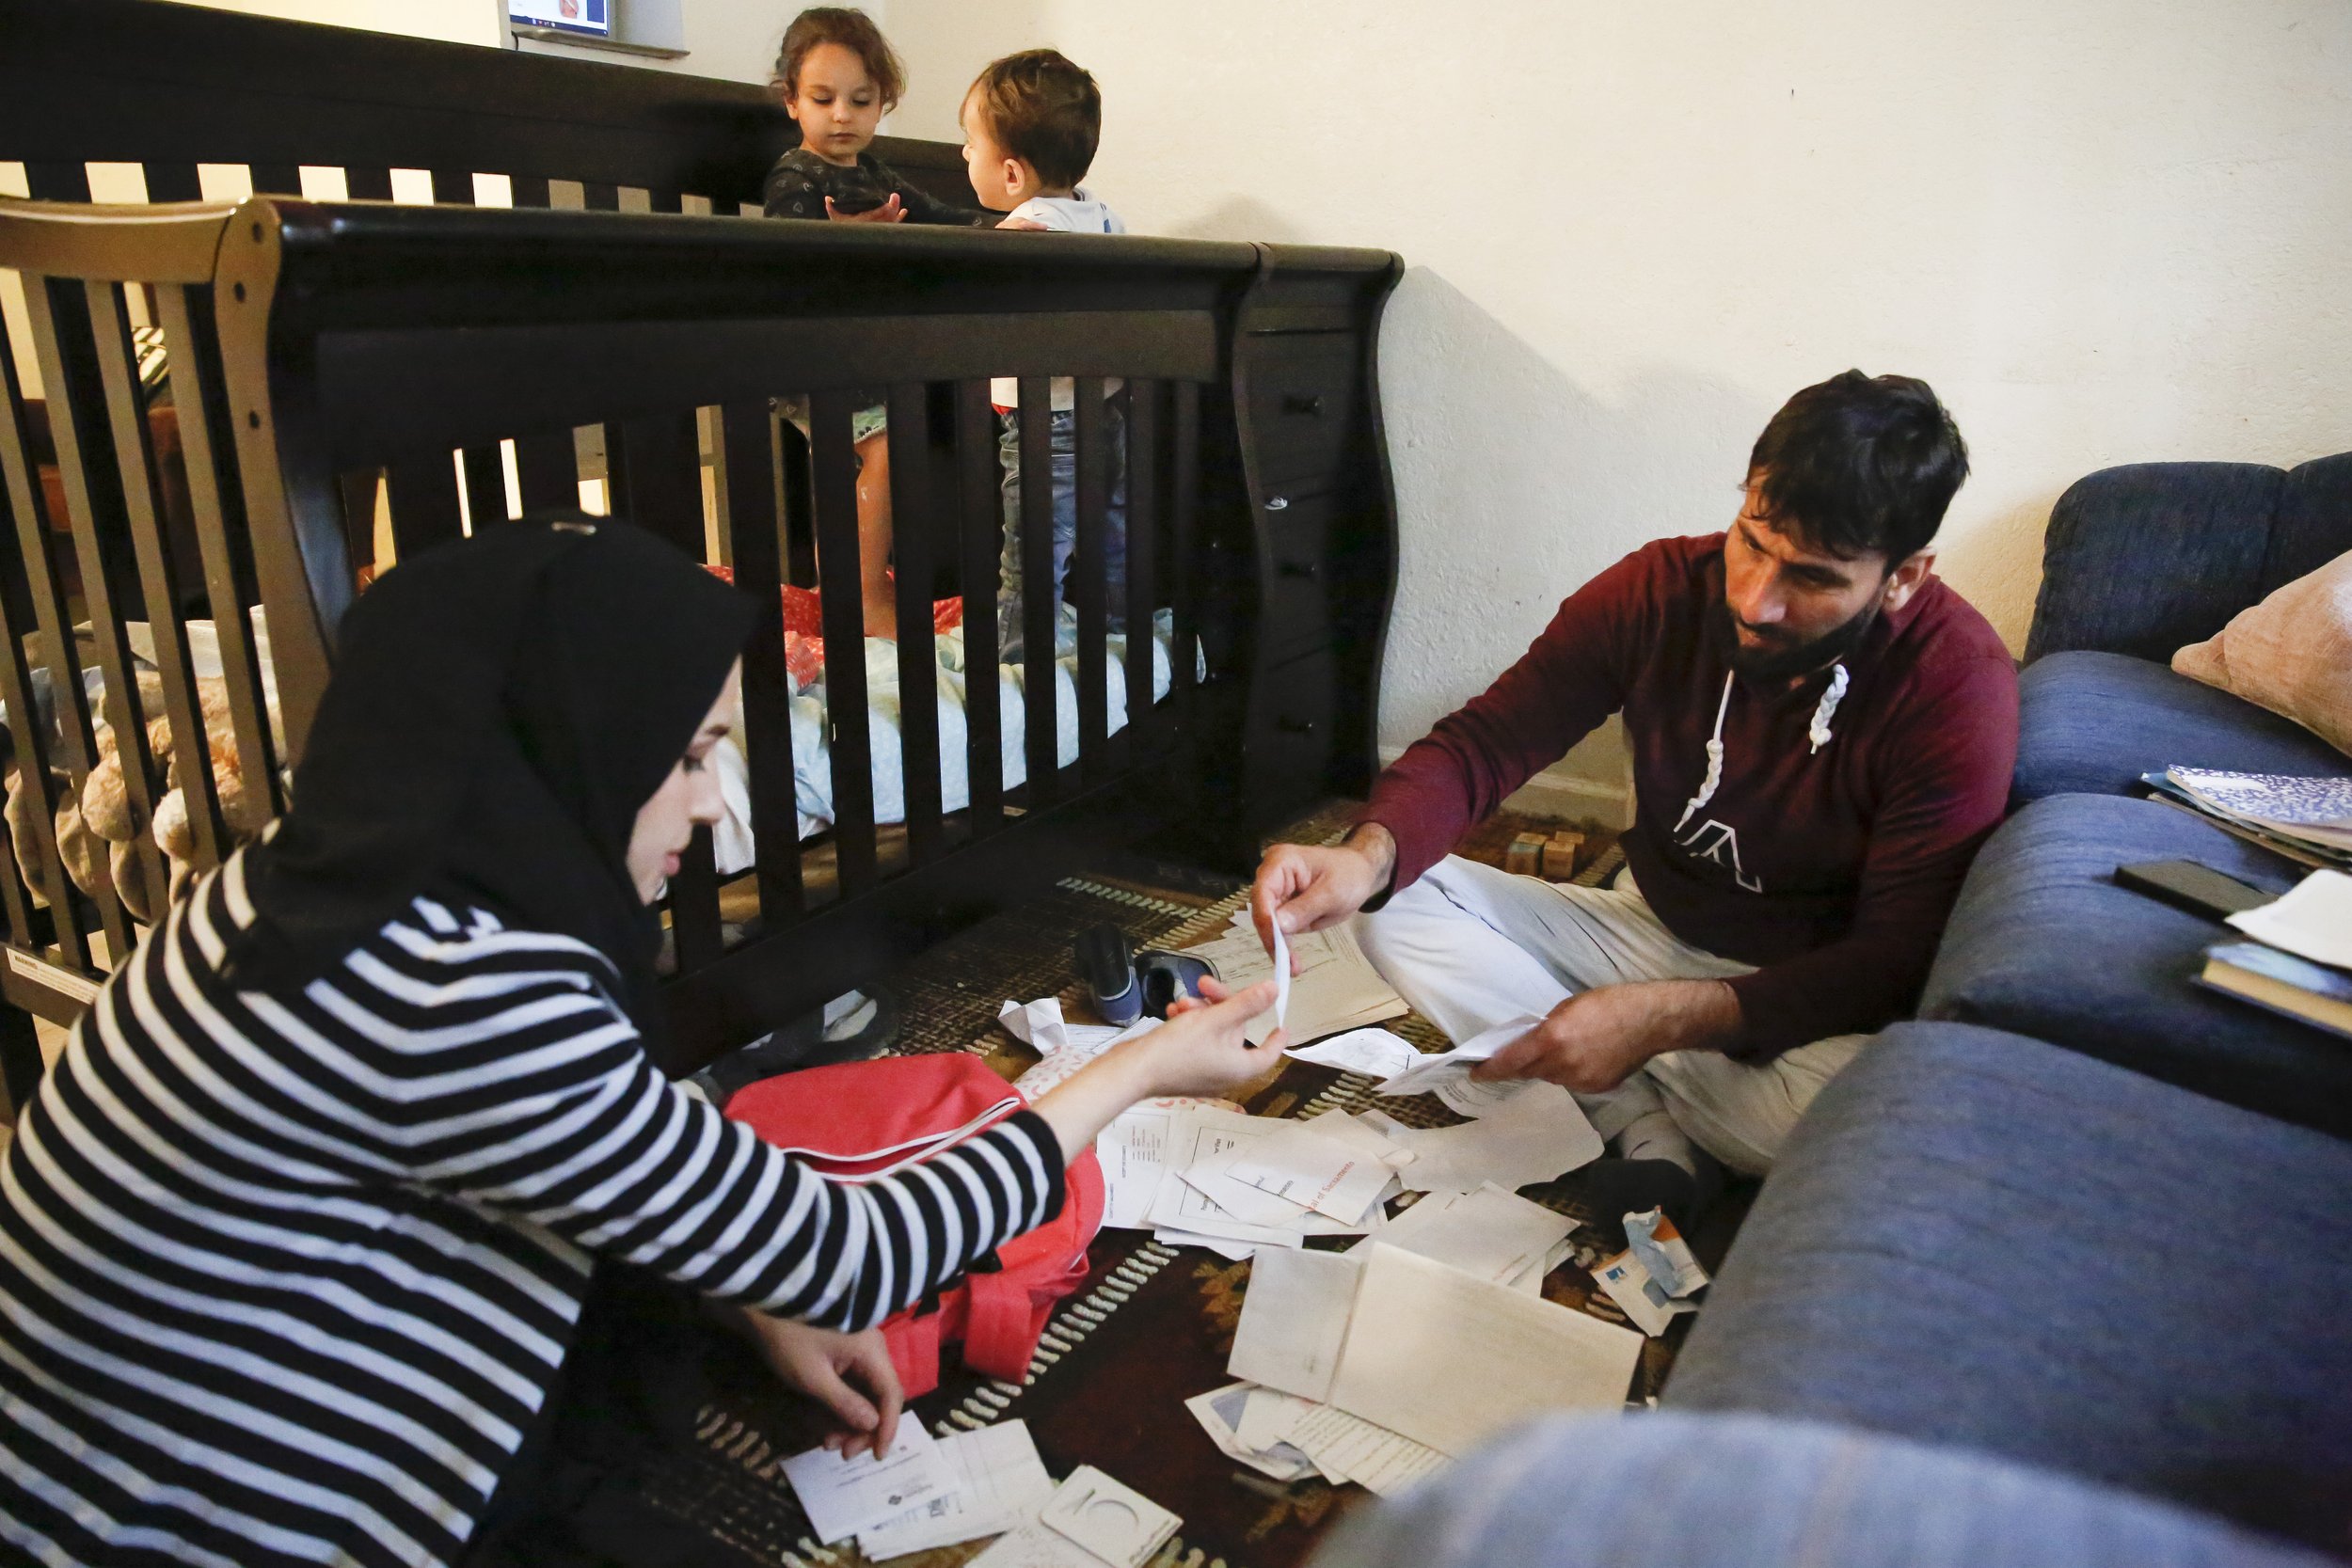  Najibullah Mohammadi and his wife Susan Mohammadi go through documents and bills on the floor of their living room while their children, Zahra and Yasar, play in the crib next to them on Thursday, April 14, 2022. Najibullah Mohammadi, his wife Susan